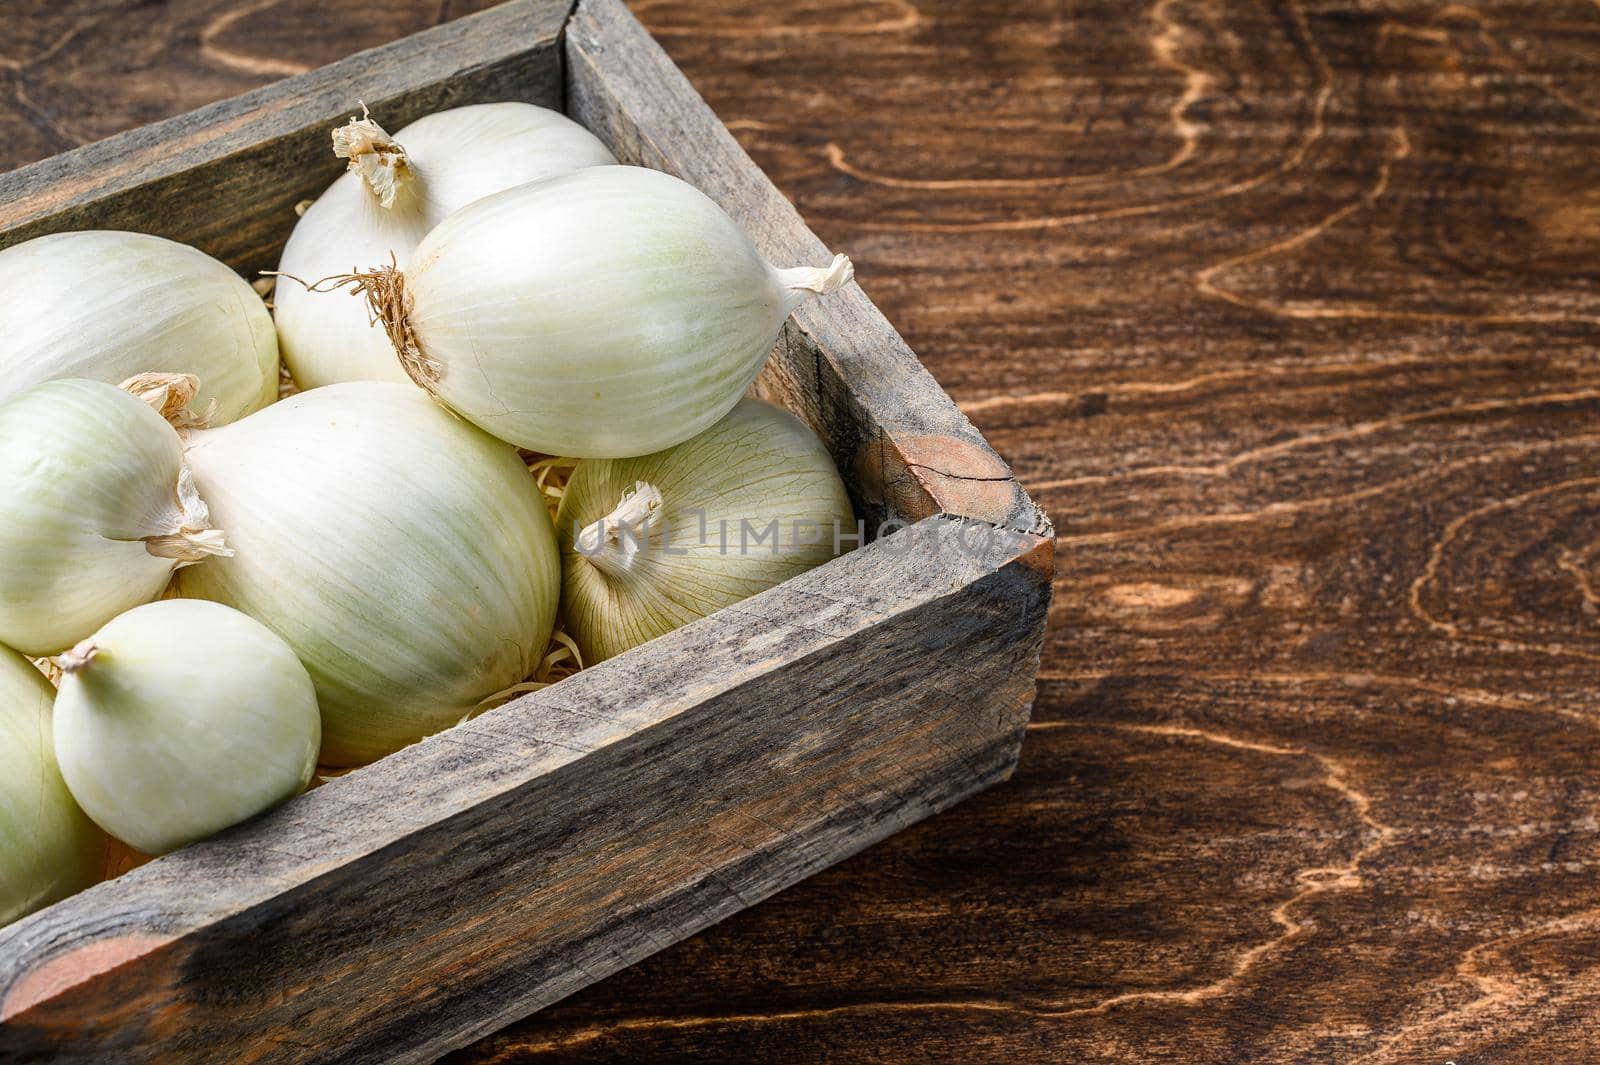 White raw onion in wooden box. Wooden background. Top view. Copy space.